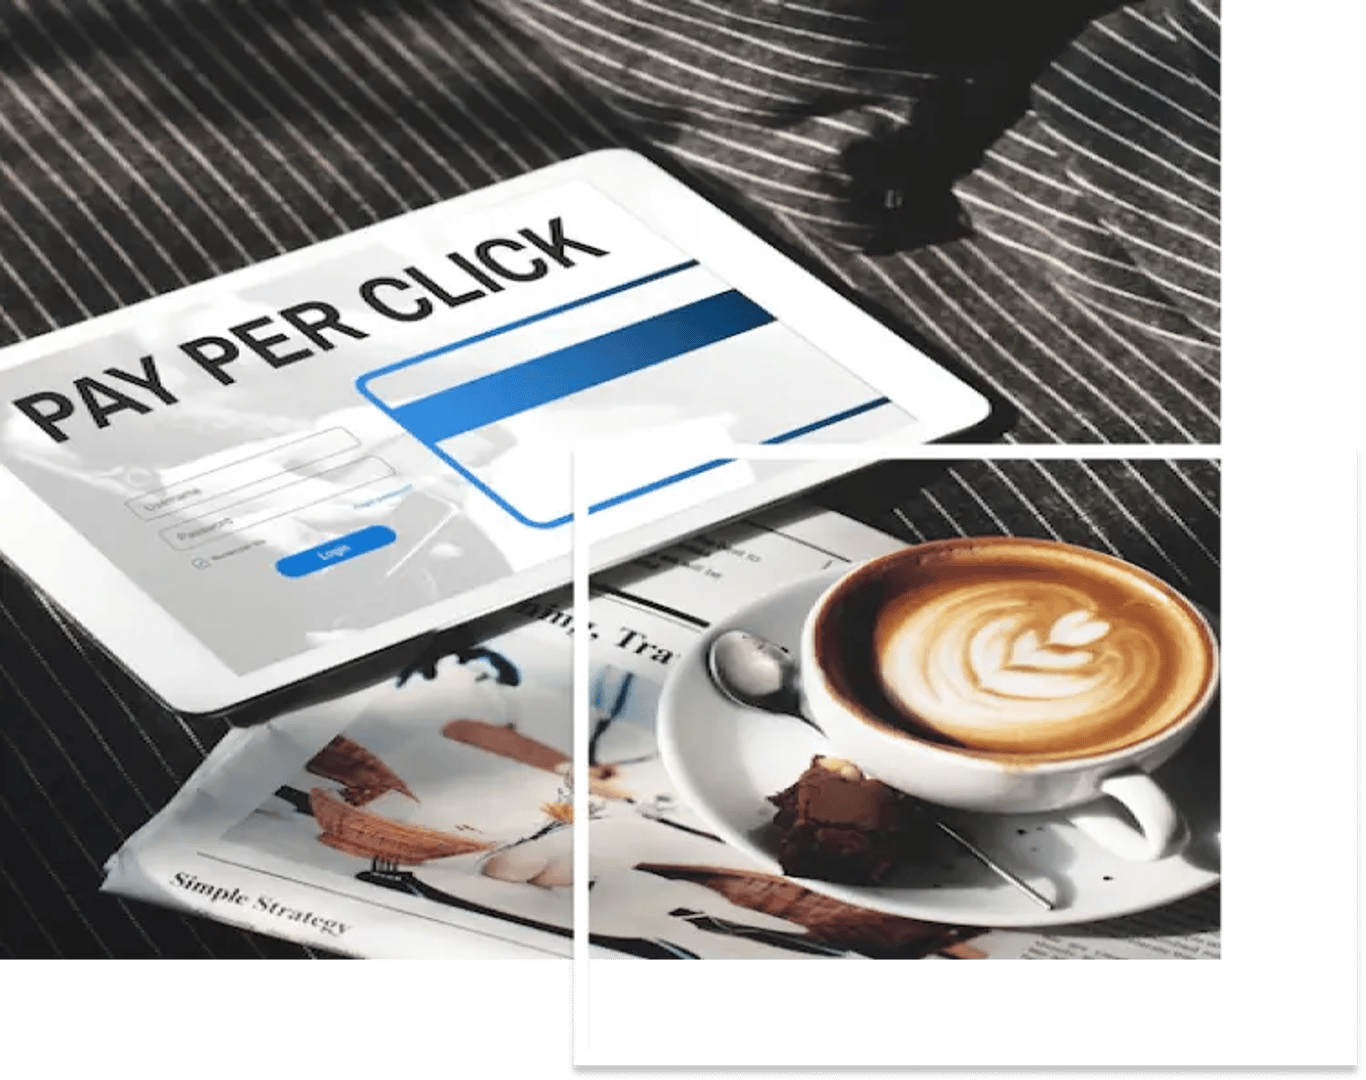 A cup of coffee with a spoon and plate is placed on a newspaper, with a tablet placed next to it which contin Pay per click text